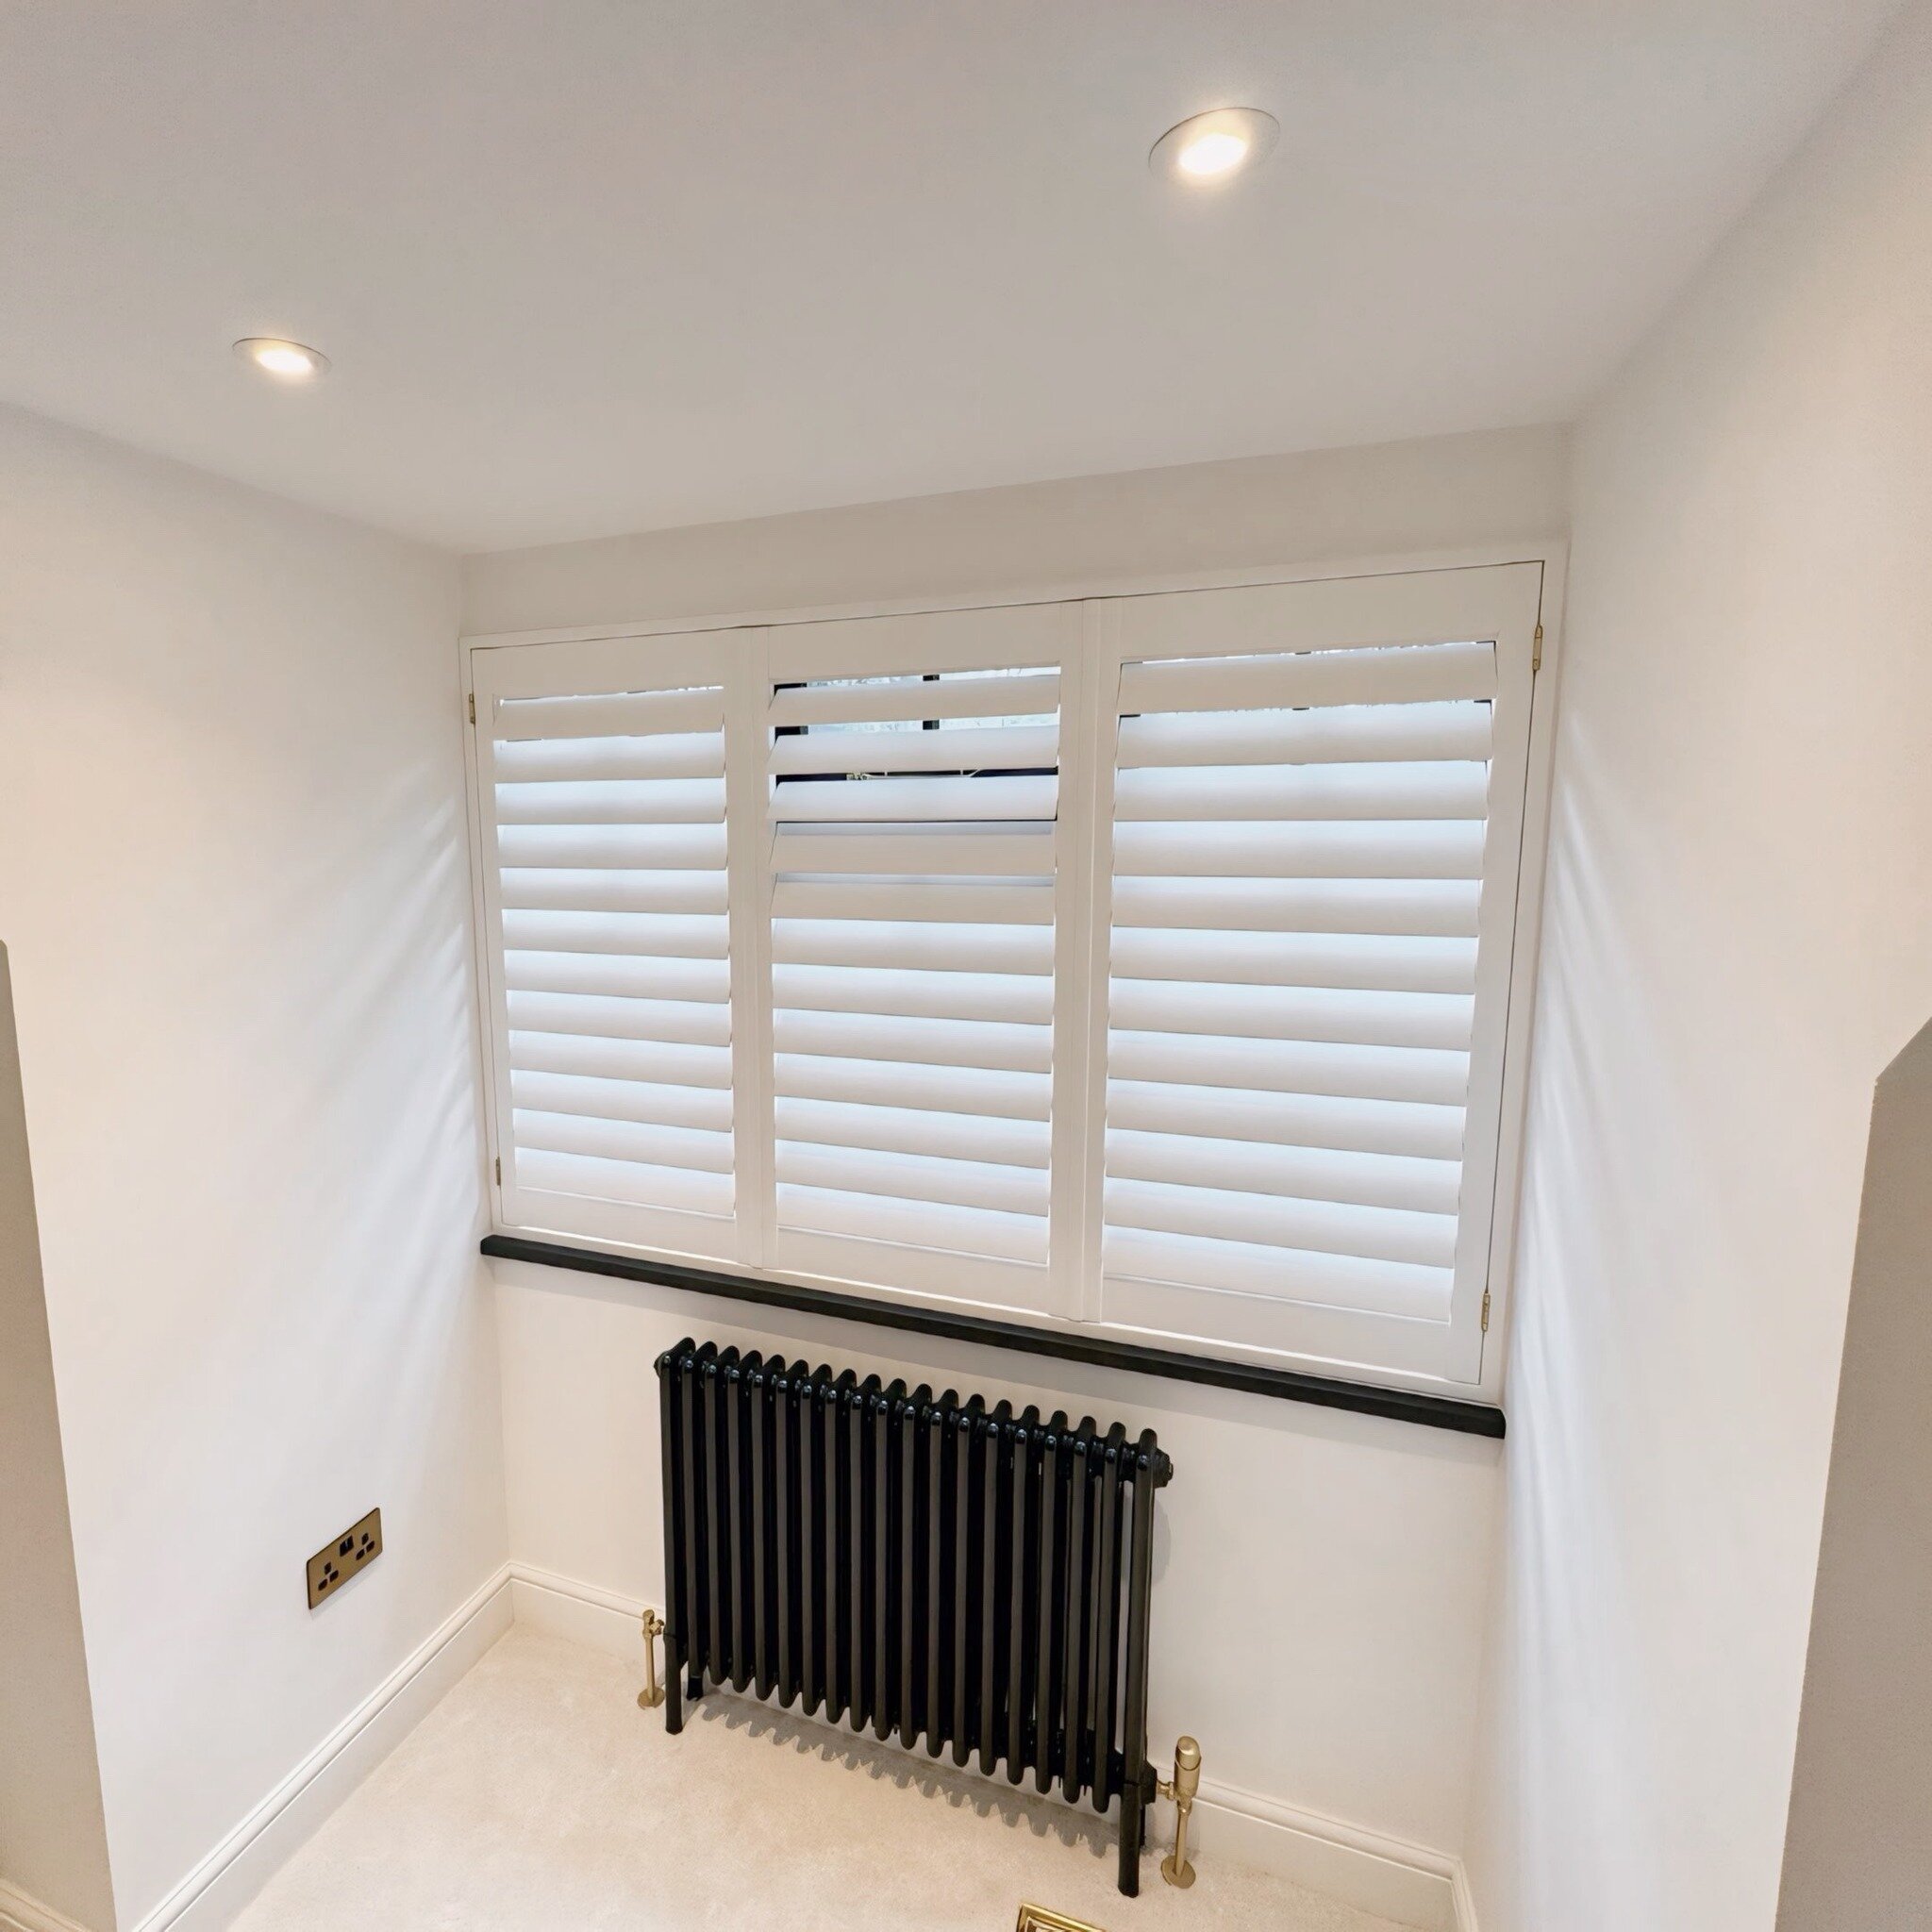 Another Stunning Installation of Our Solid Wood, Full Height Shutters!

This Customer Opted for An Invisible Slat Control Split and Hidden Tilt Rod, in Pure White Colourway, 89mm Large Slats and Brass Hinges. 

Incorporating a Coloured Hinge is the P